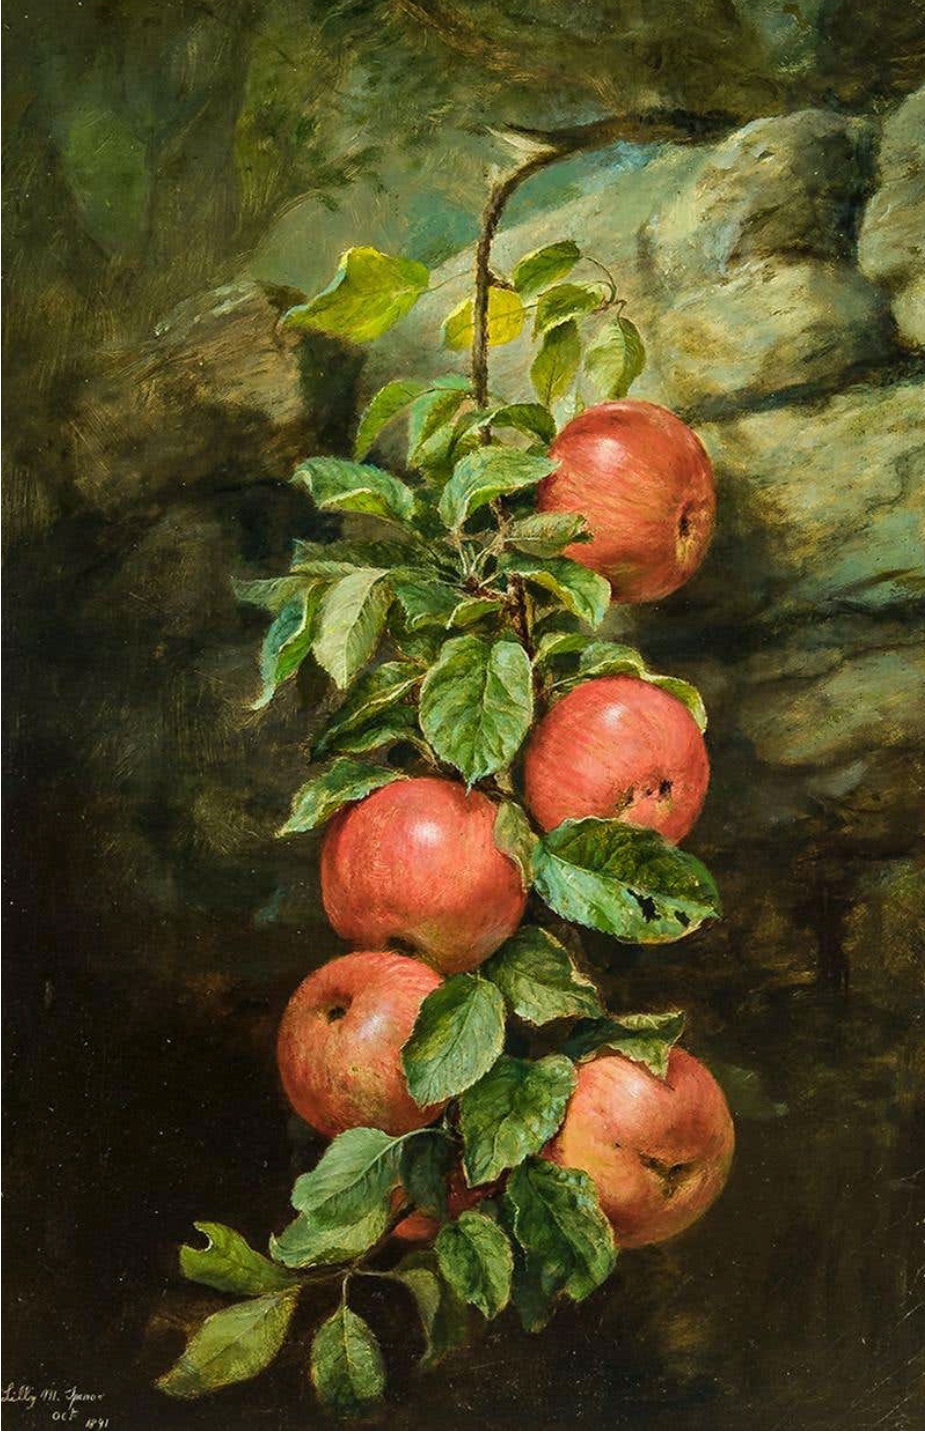 Still Life with Apples by Lilly Martin Spencer - 1891 - 71.76 x 45.72 cm The Westmoreland Museum of American Art